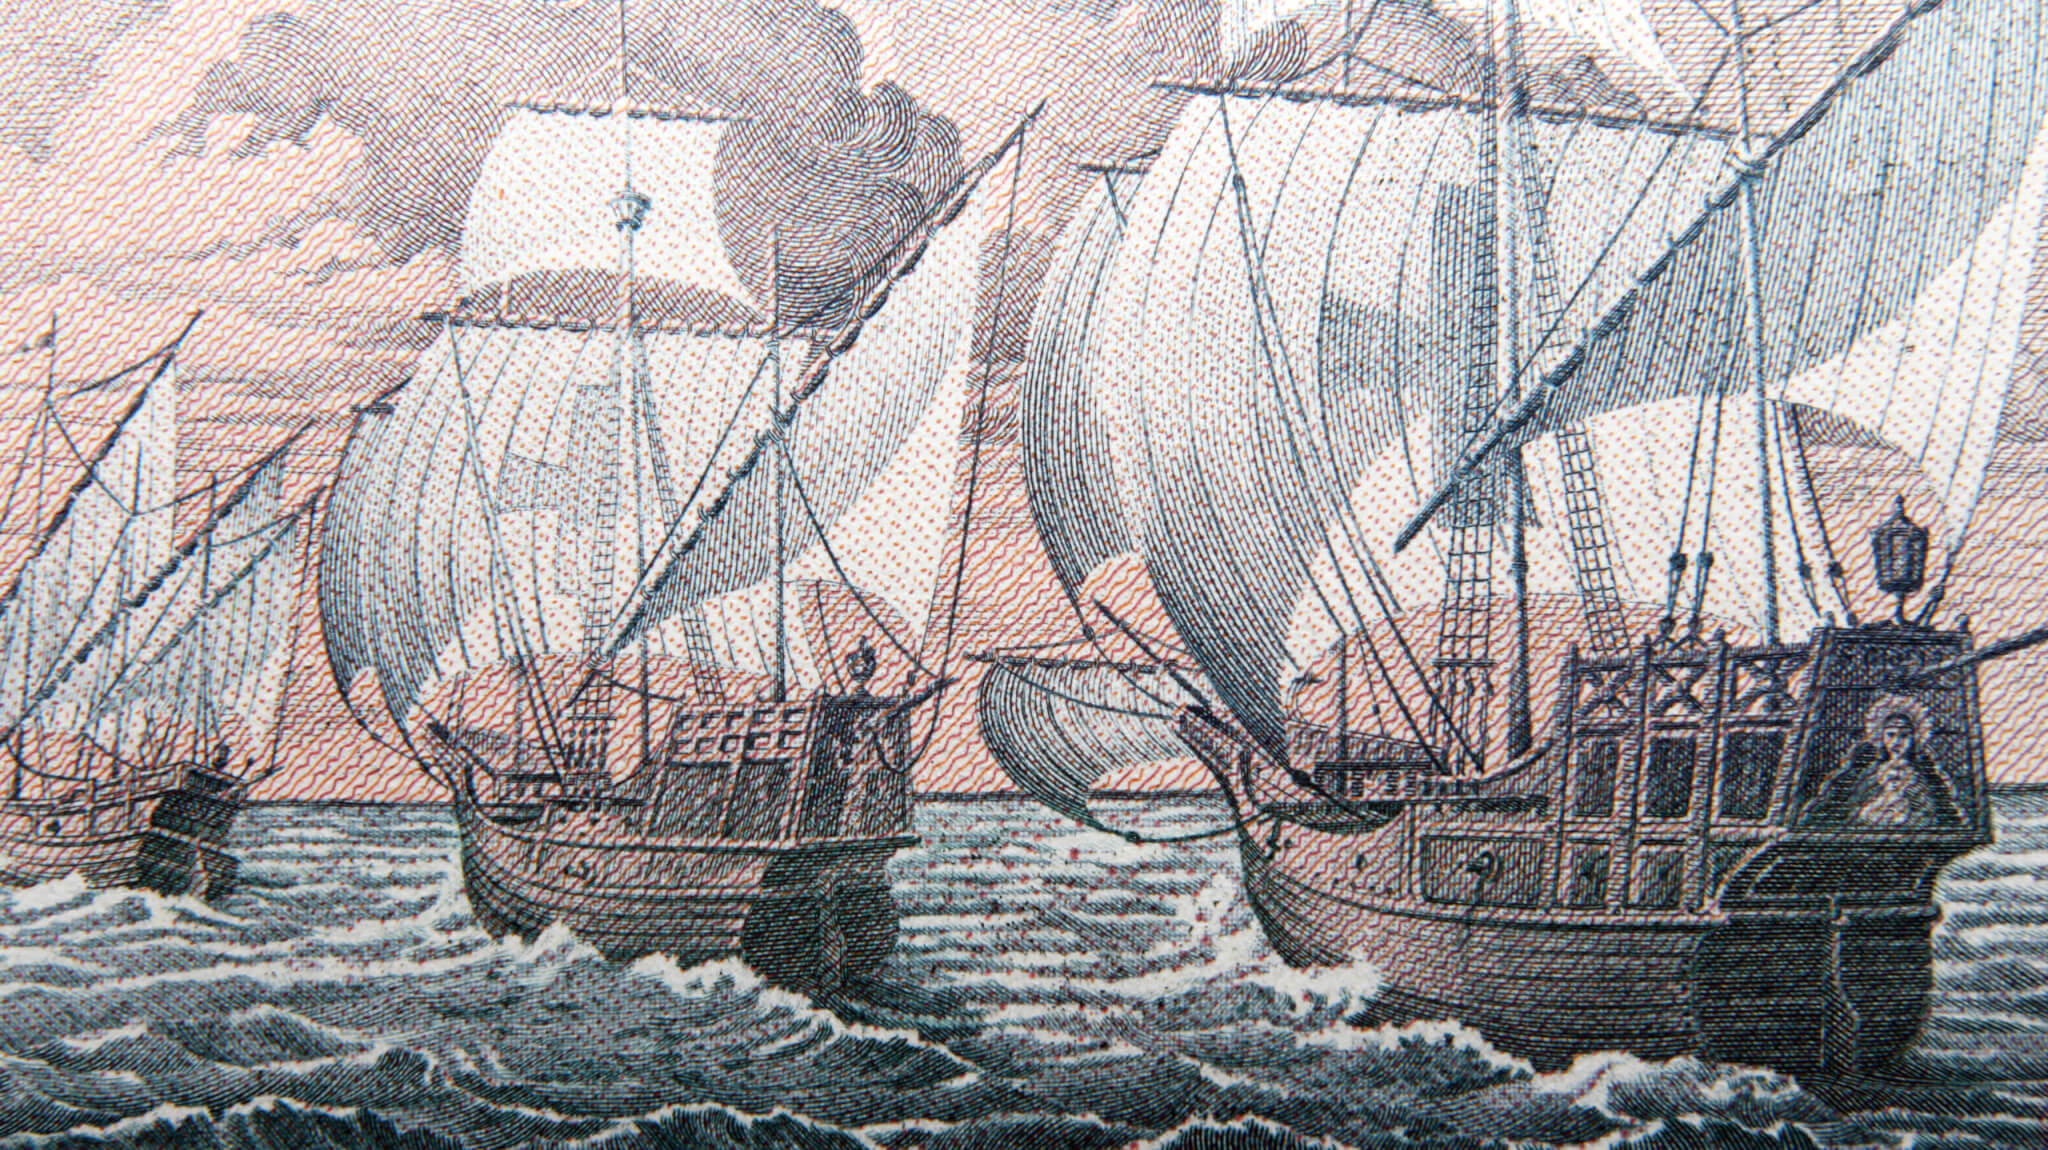 voyages of christopher columbus